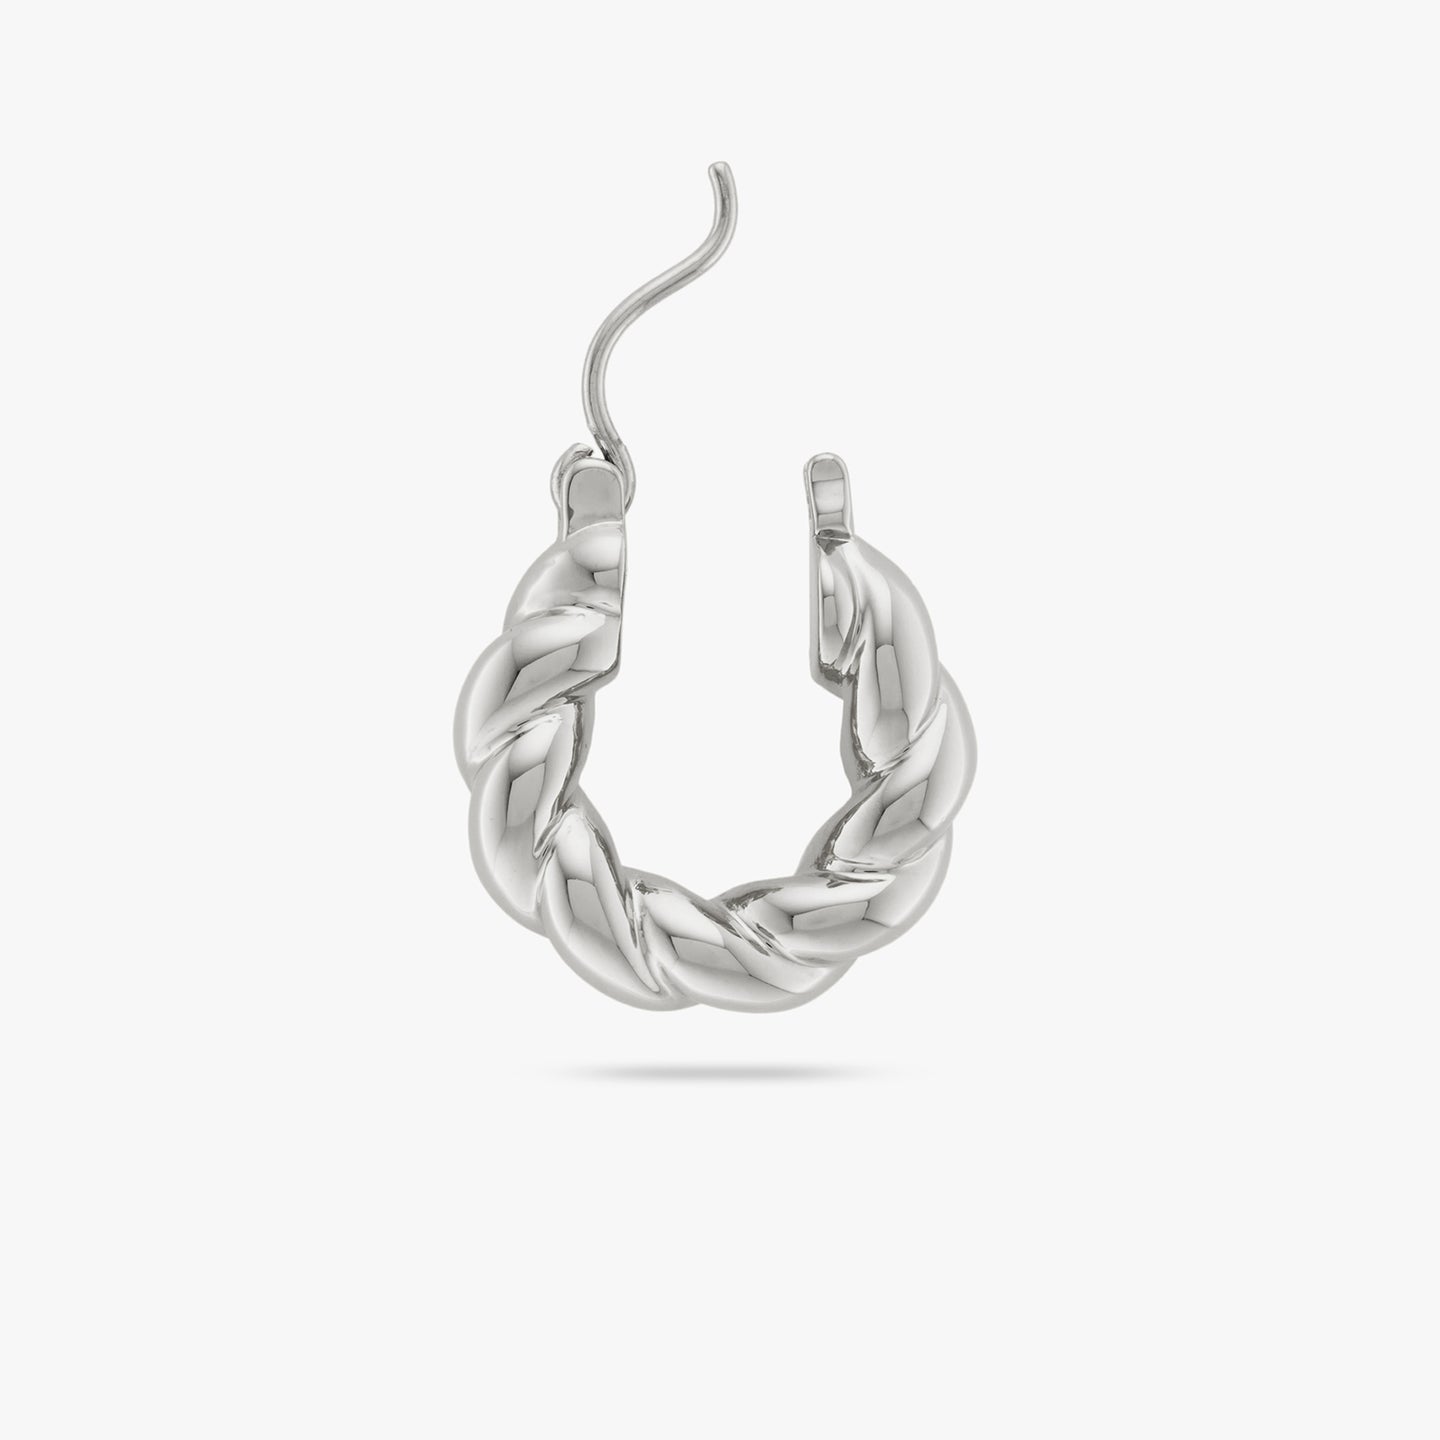 This is a small silver hoop with a twisted detail and the clasp opened color:null|silver